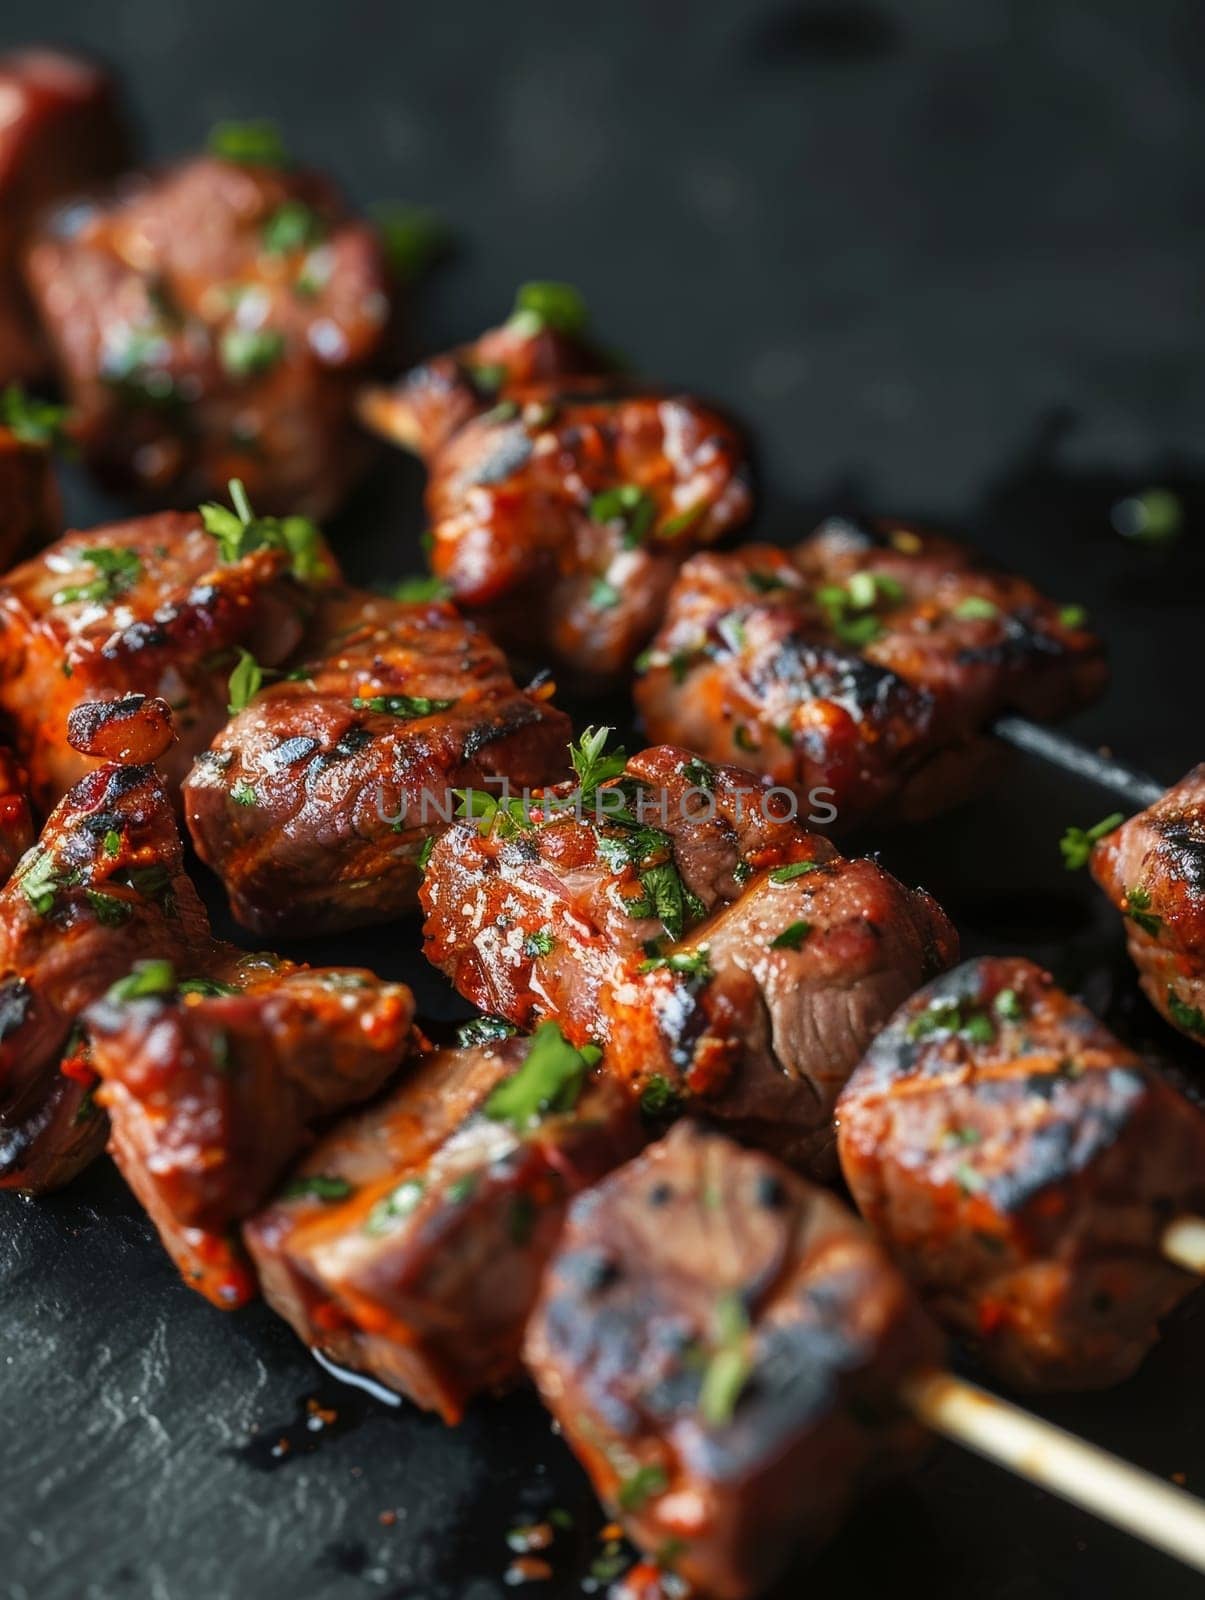 Peruvian anticuchos, skewers of grilled heart meat marinated in garlic and spices, representing the bold and flavorful culinary heritage of Peru